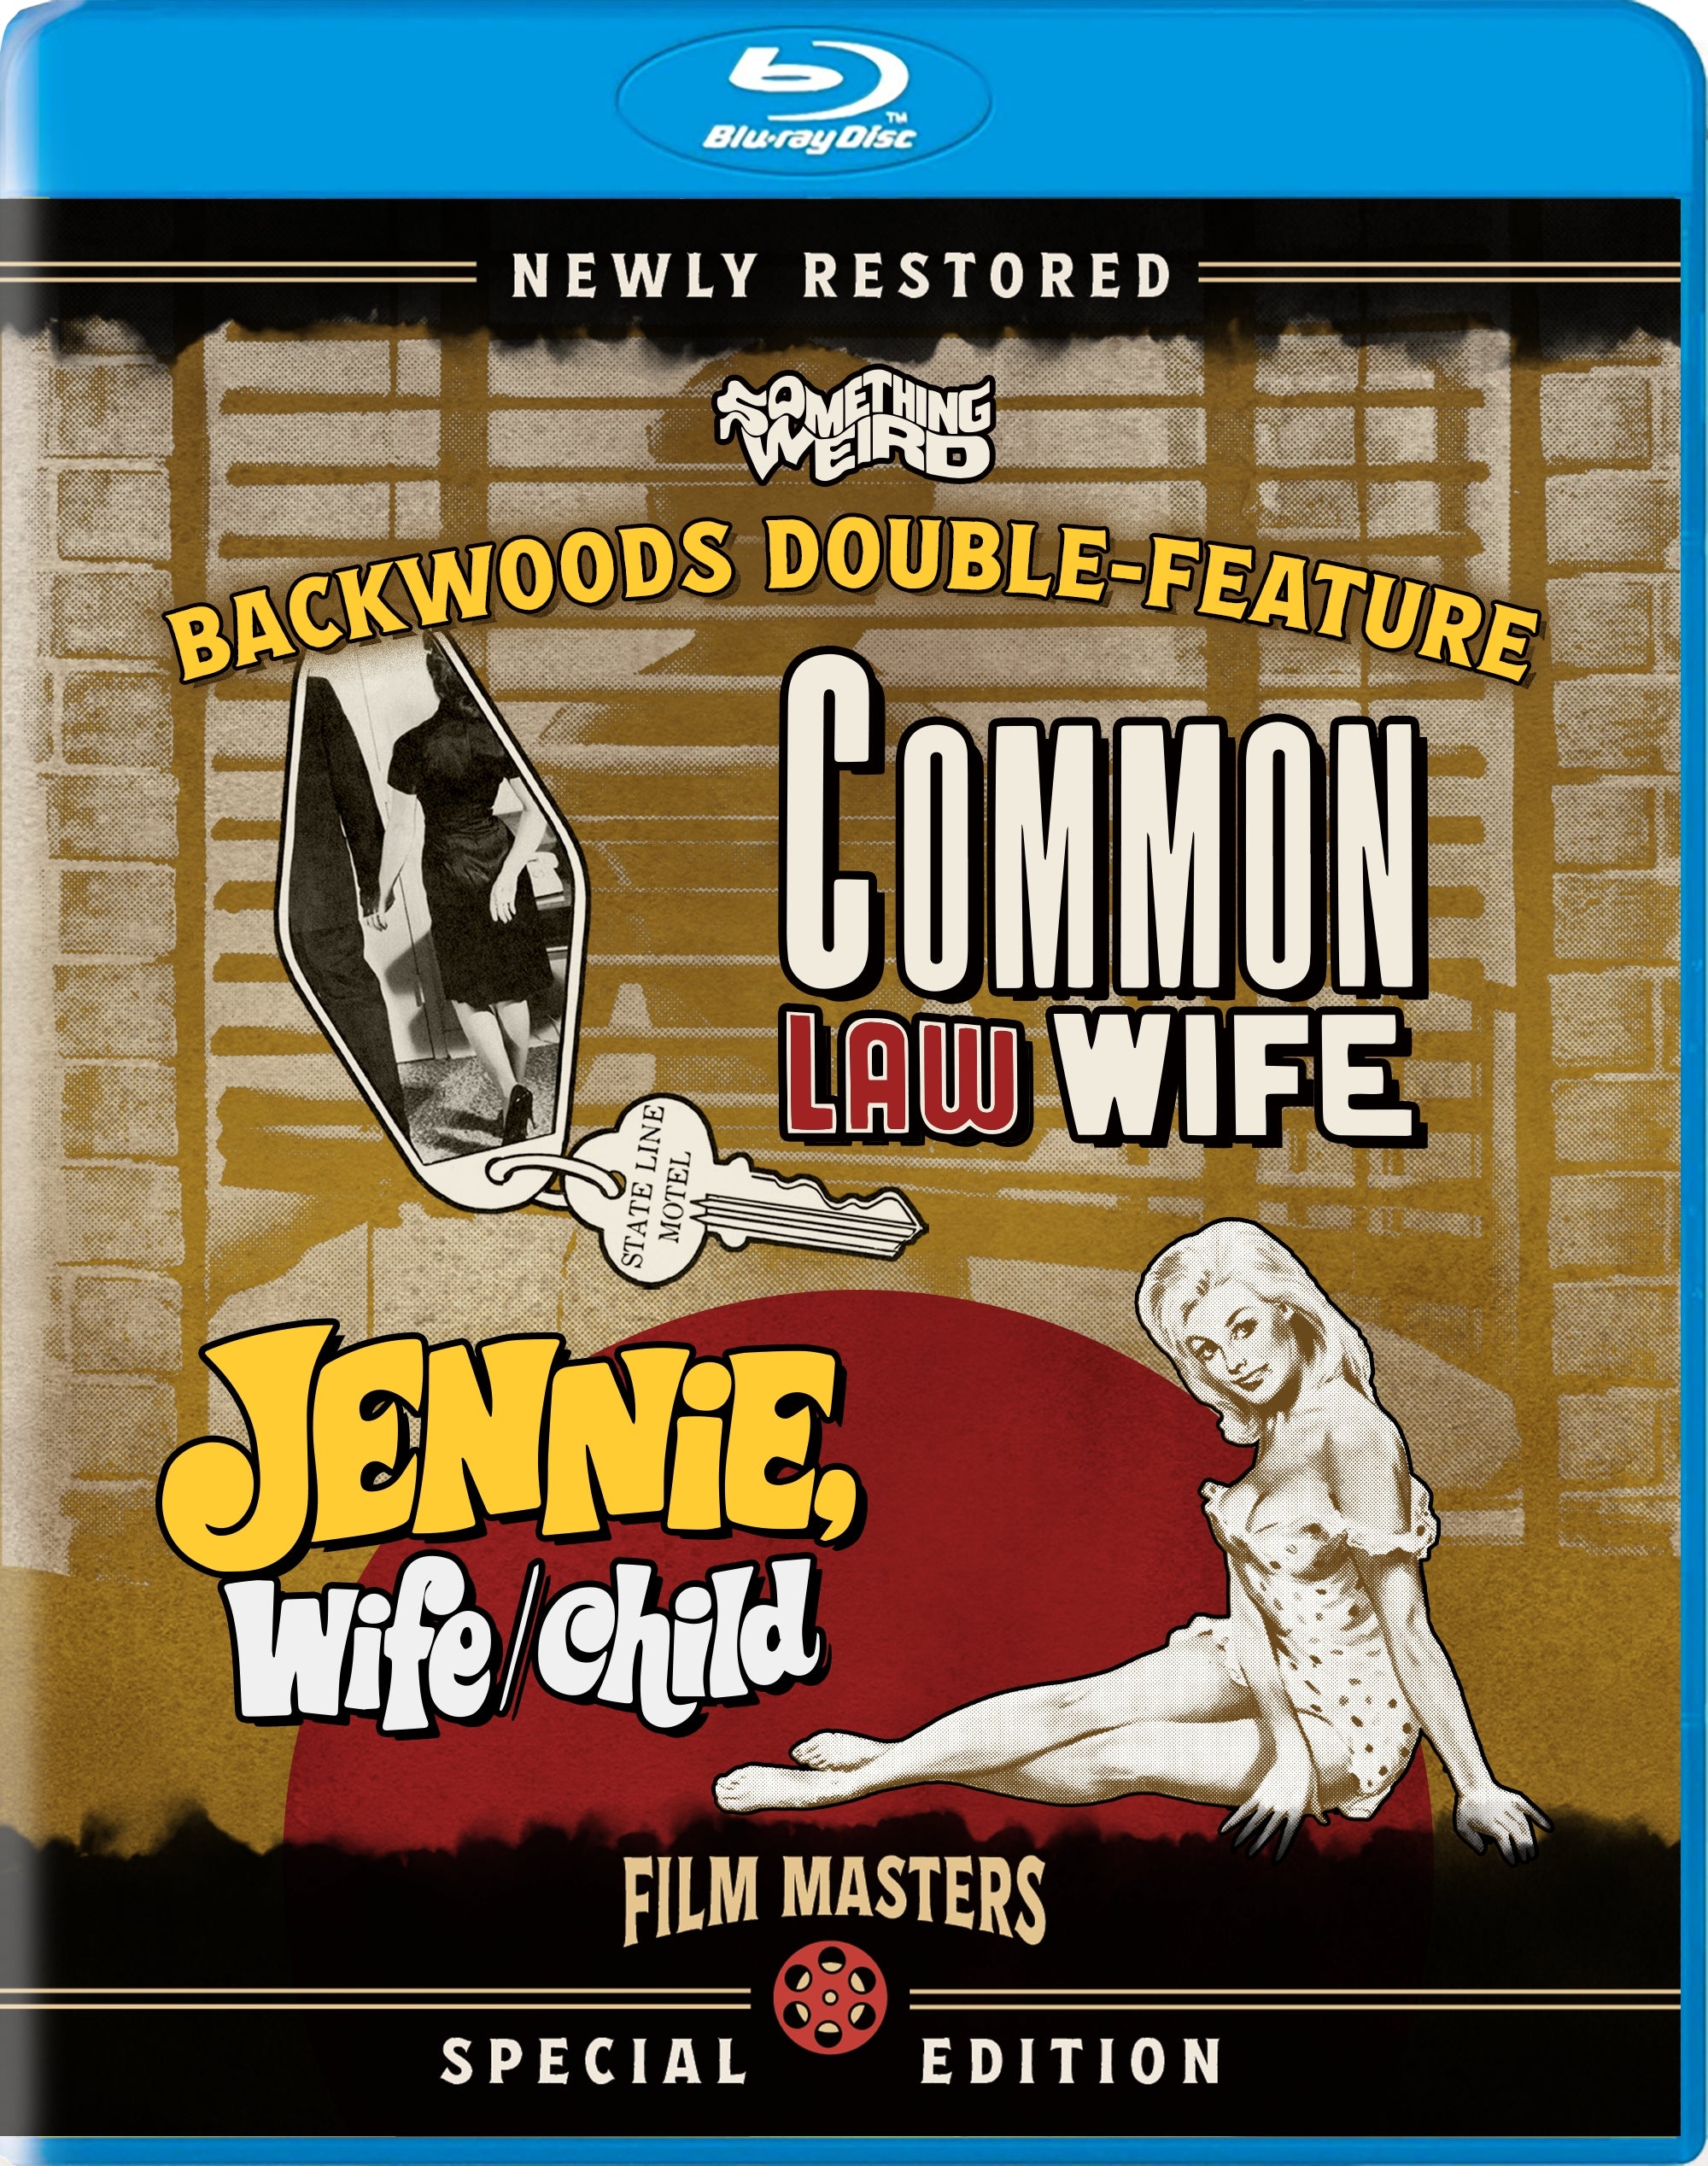 COMMON LAW WIFE / JENNIE, WIFE/CHILD BLU-RAY [PRE-ORDER]